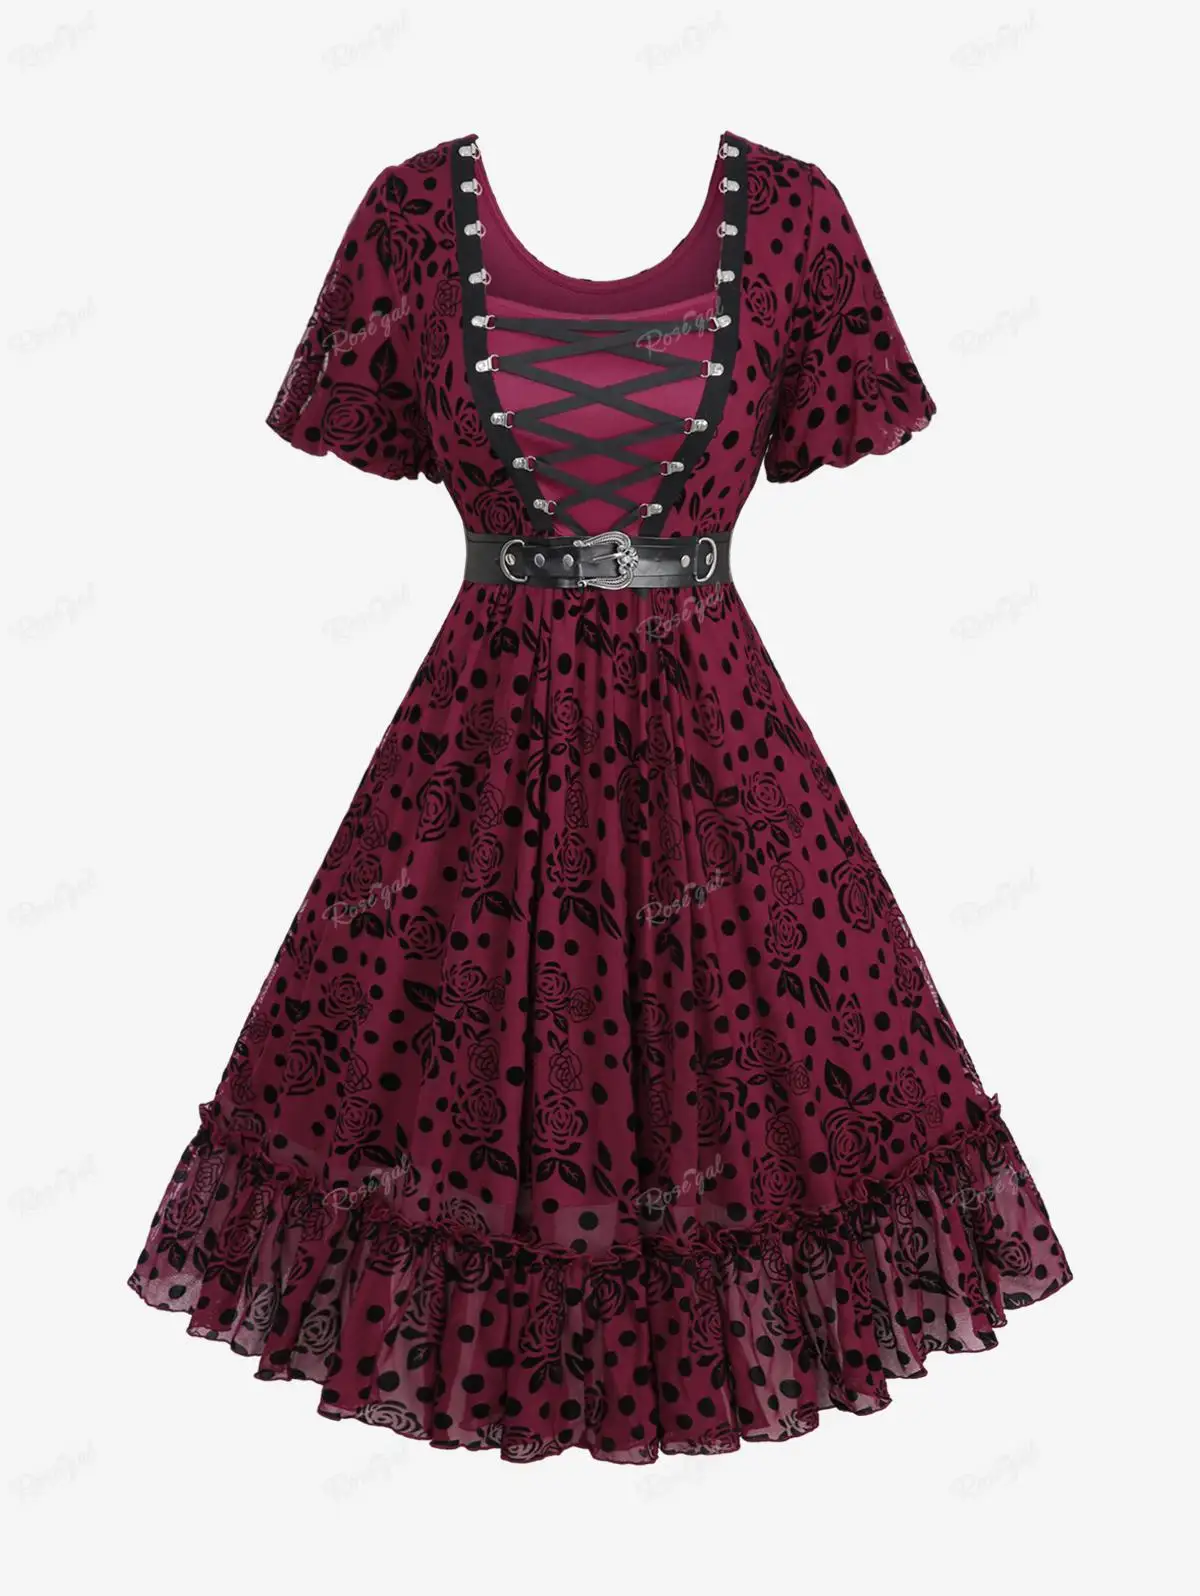 

ROSEGAL Plus Size Gothic Puff Sleeves Polka Dot Floral Mesh Flocking Dresses Summer New Ruched Ruffles Dress With PU Buckle Belt